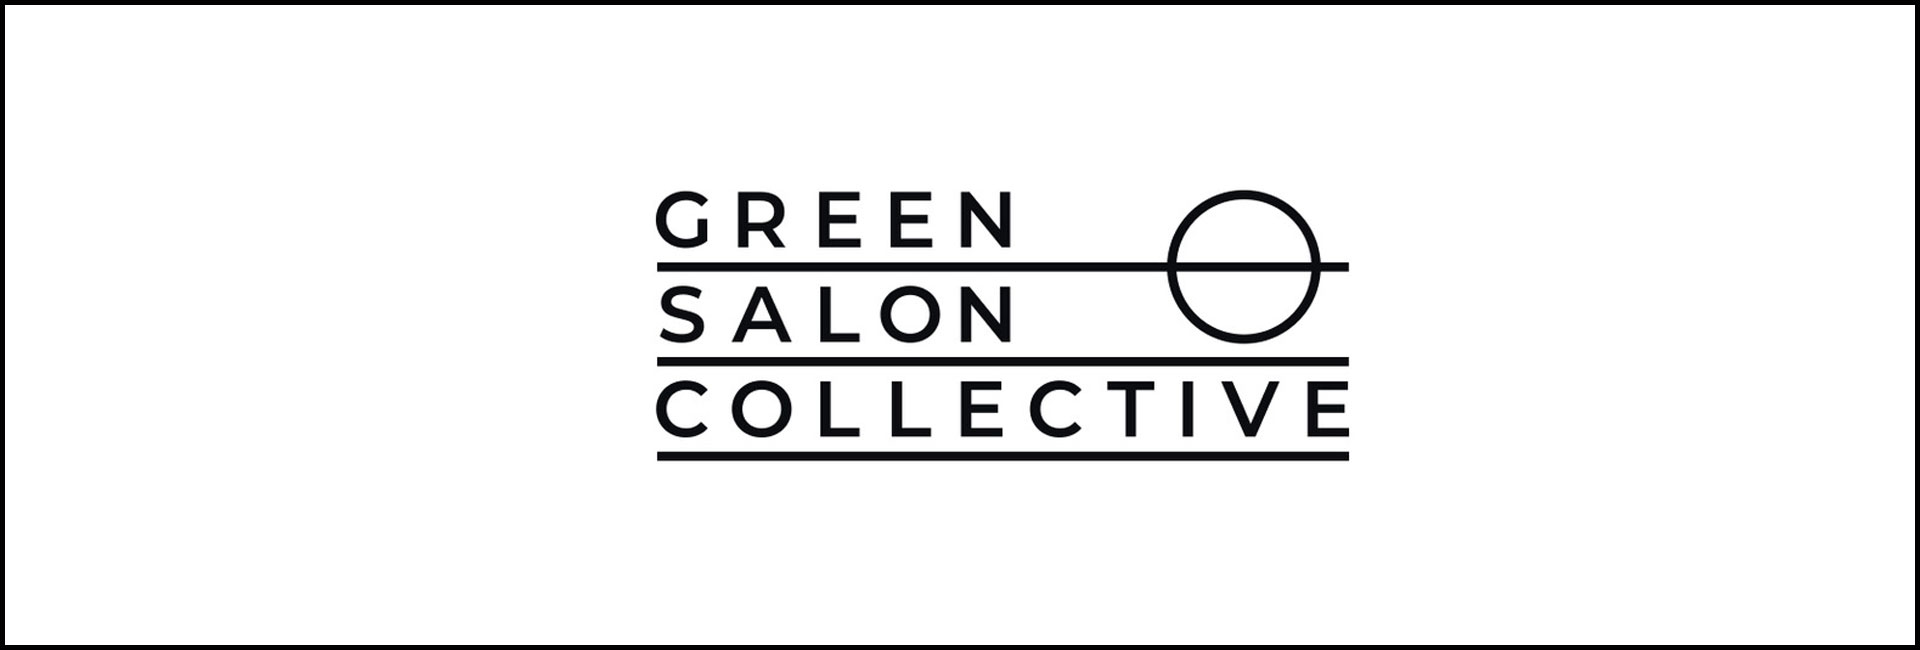 The green salon collective salons in Oxted